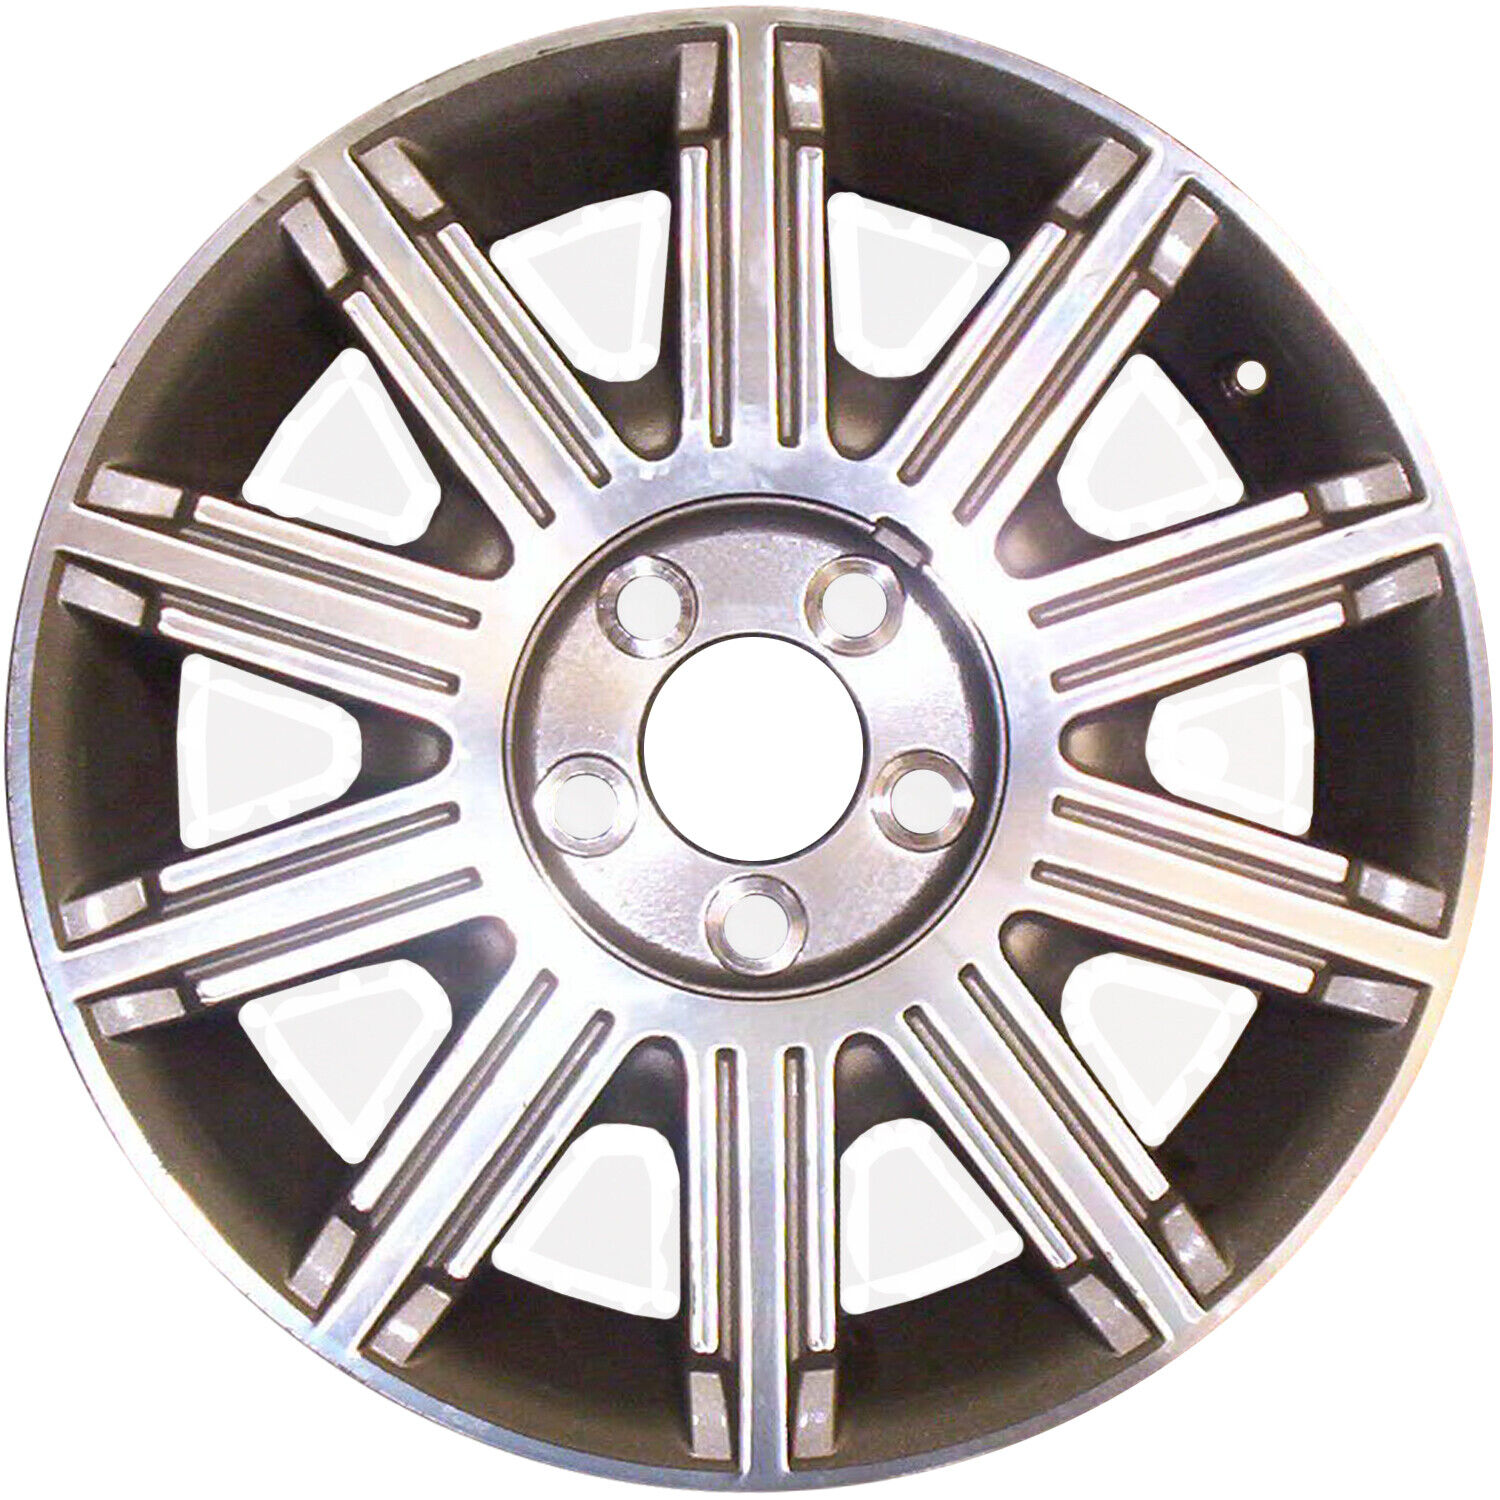 03635 Reconditioned OEM Aluminum Wheel 17x7 fits 2006-2011 Lincoln Town Car